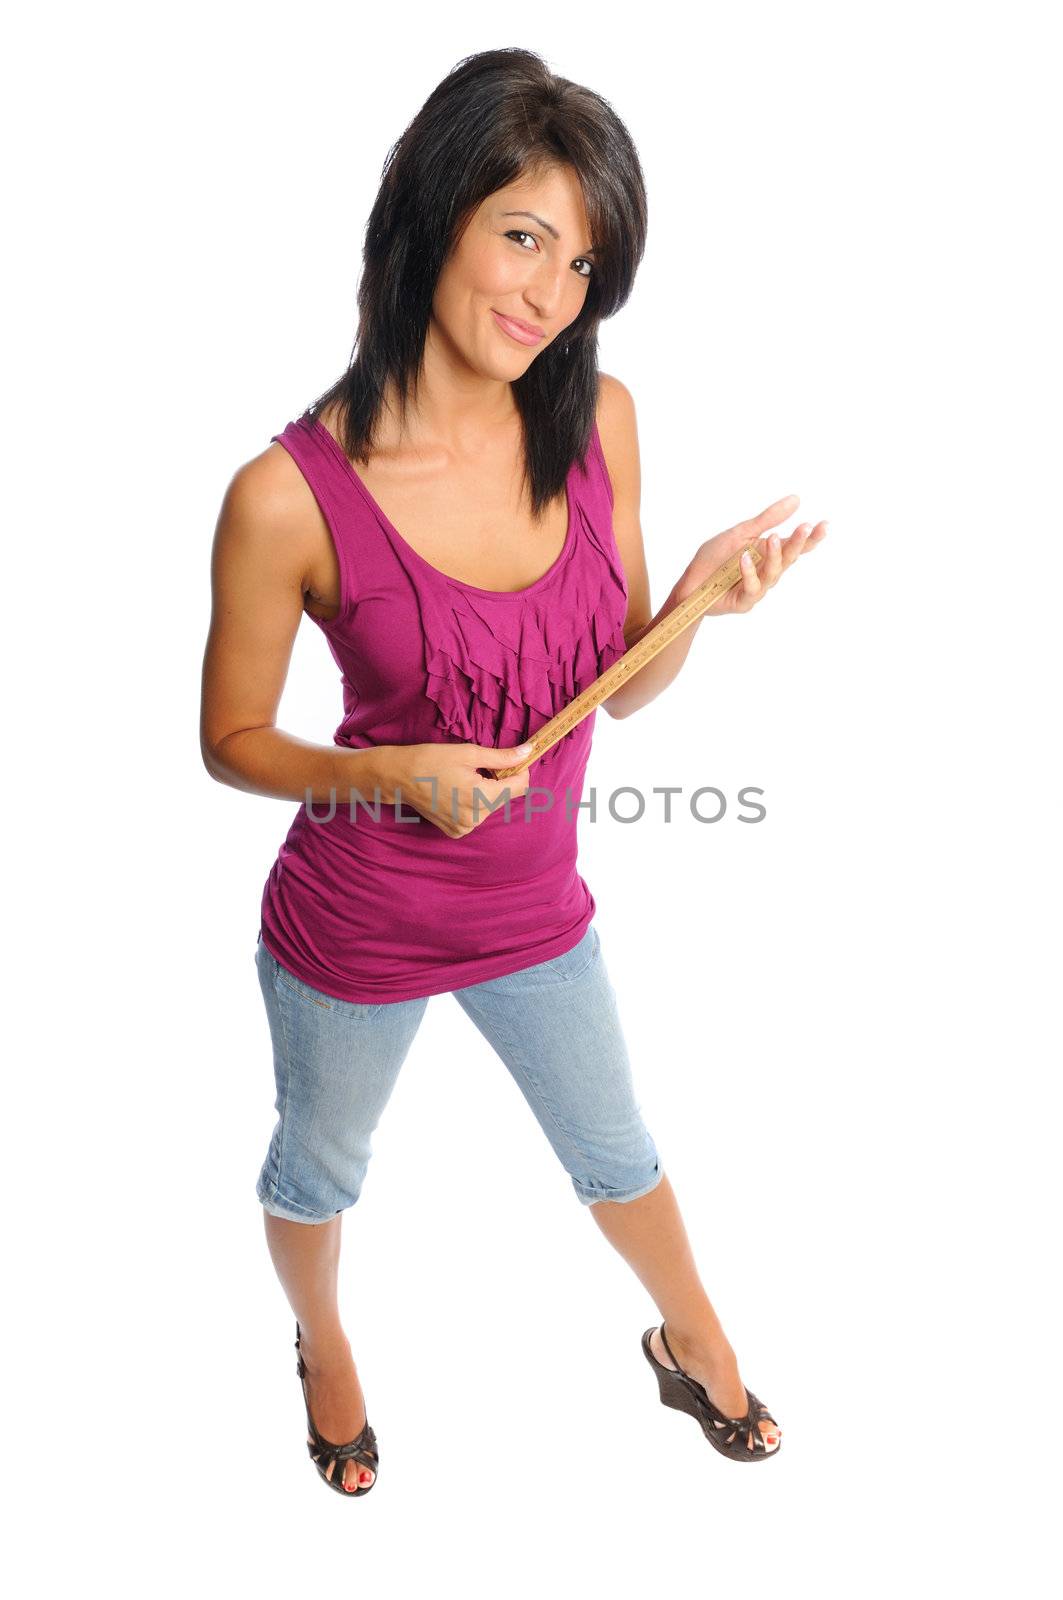 back to school with an attractive hispanic woman holding a ruler on a white background